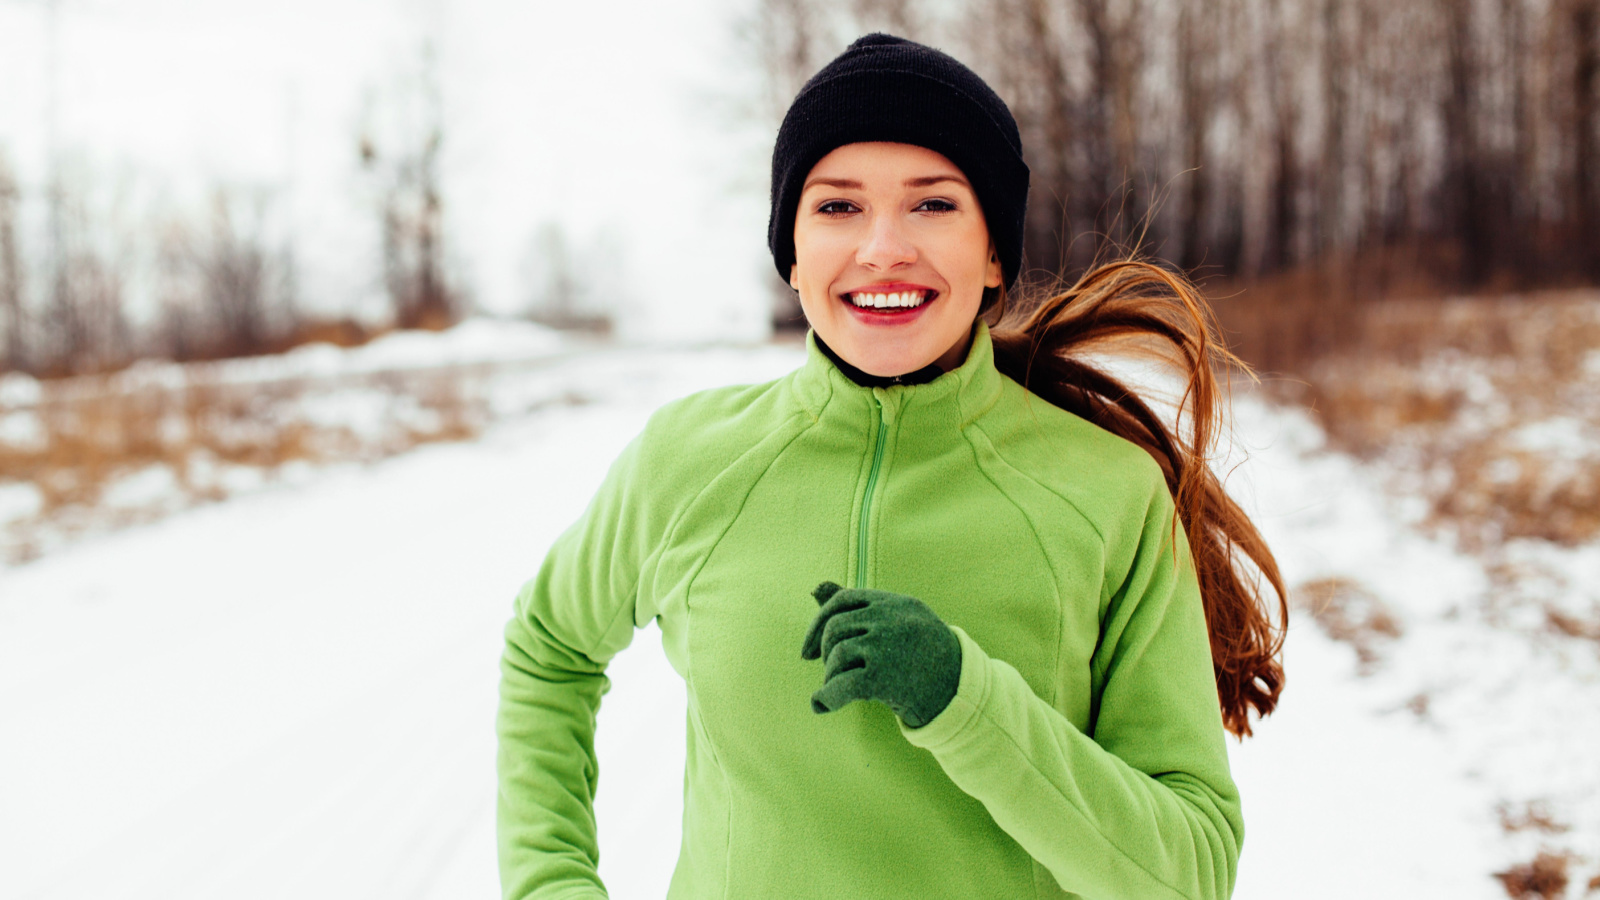 image credit: baranq/shutterstock <p><span>Running on snowy trails is a challenging and exhilarating way to stay fit during winter. The snow adds extra difficulty, making it a great workout. It’s also a serene way to enjoy the beauty of nature during the colder months. Make sure to wear trail running shoes with good grip.</span></p>